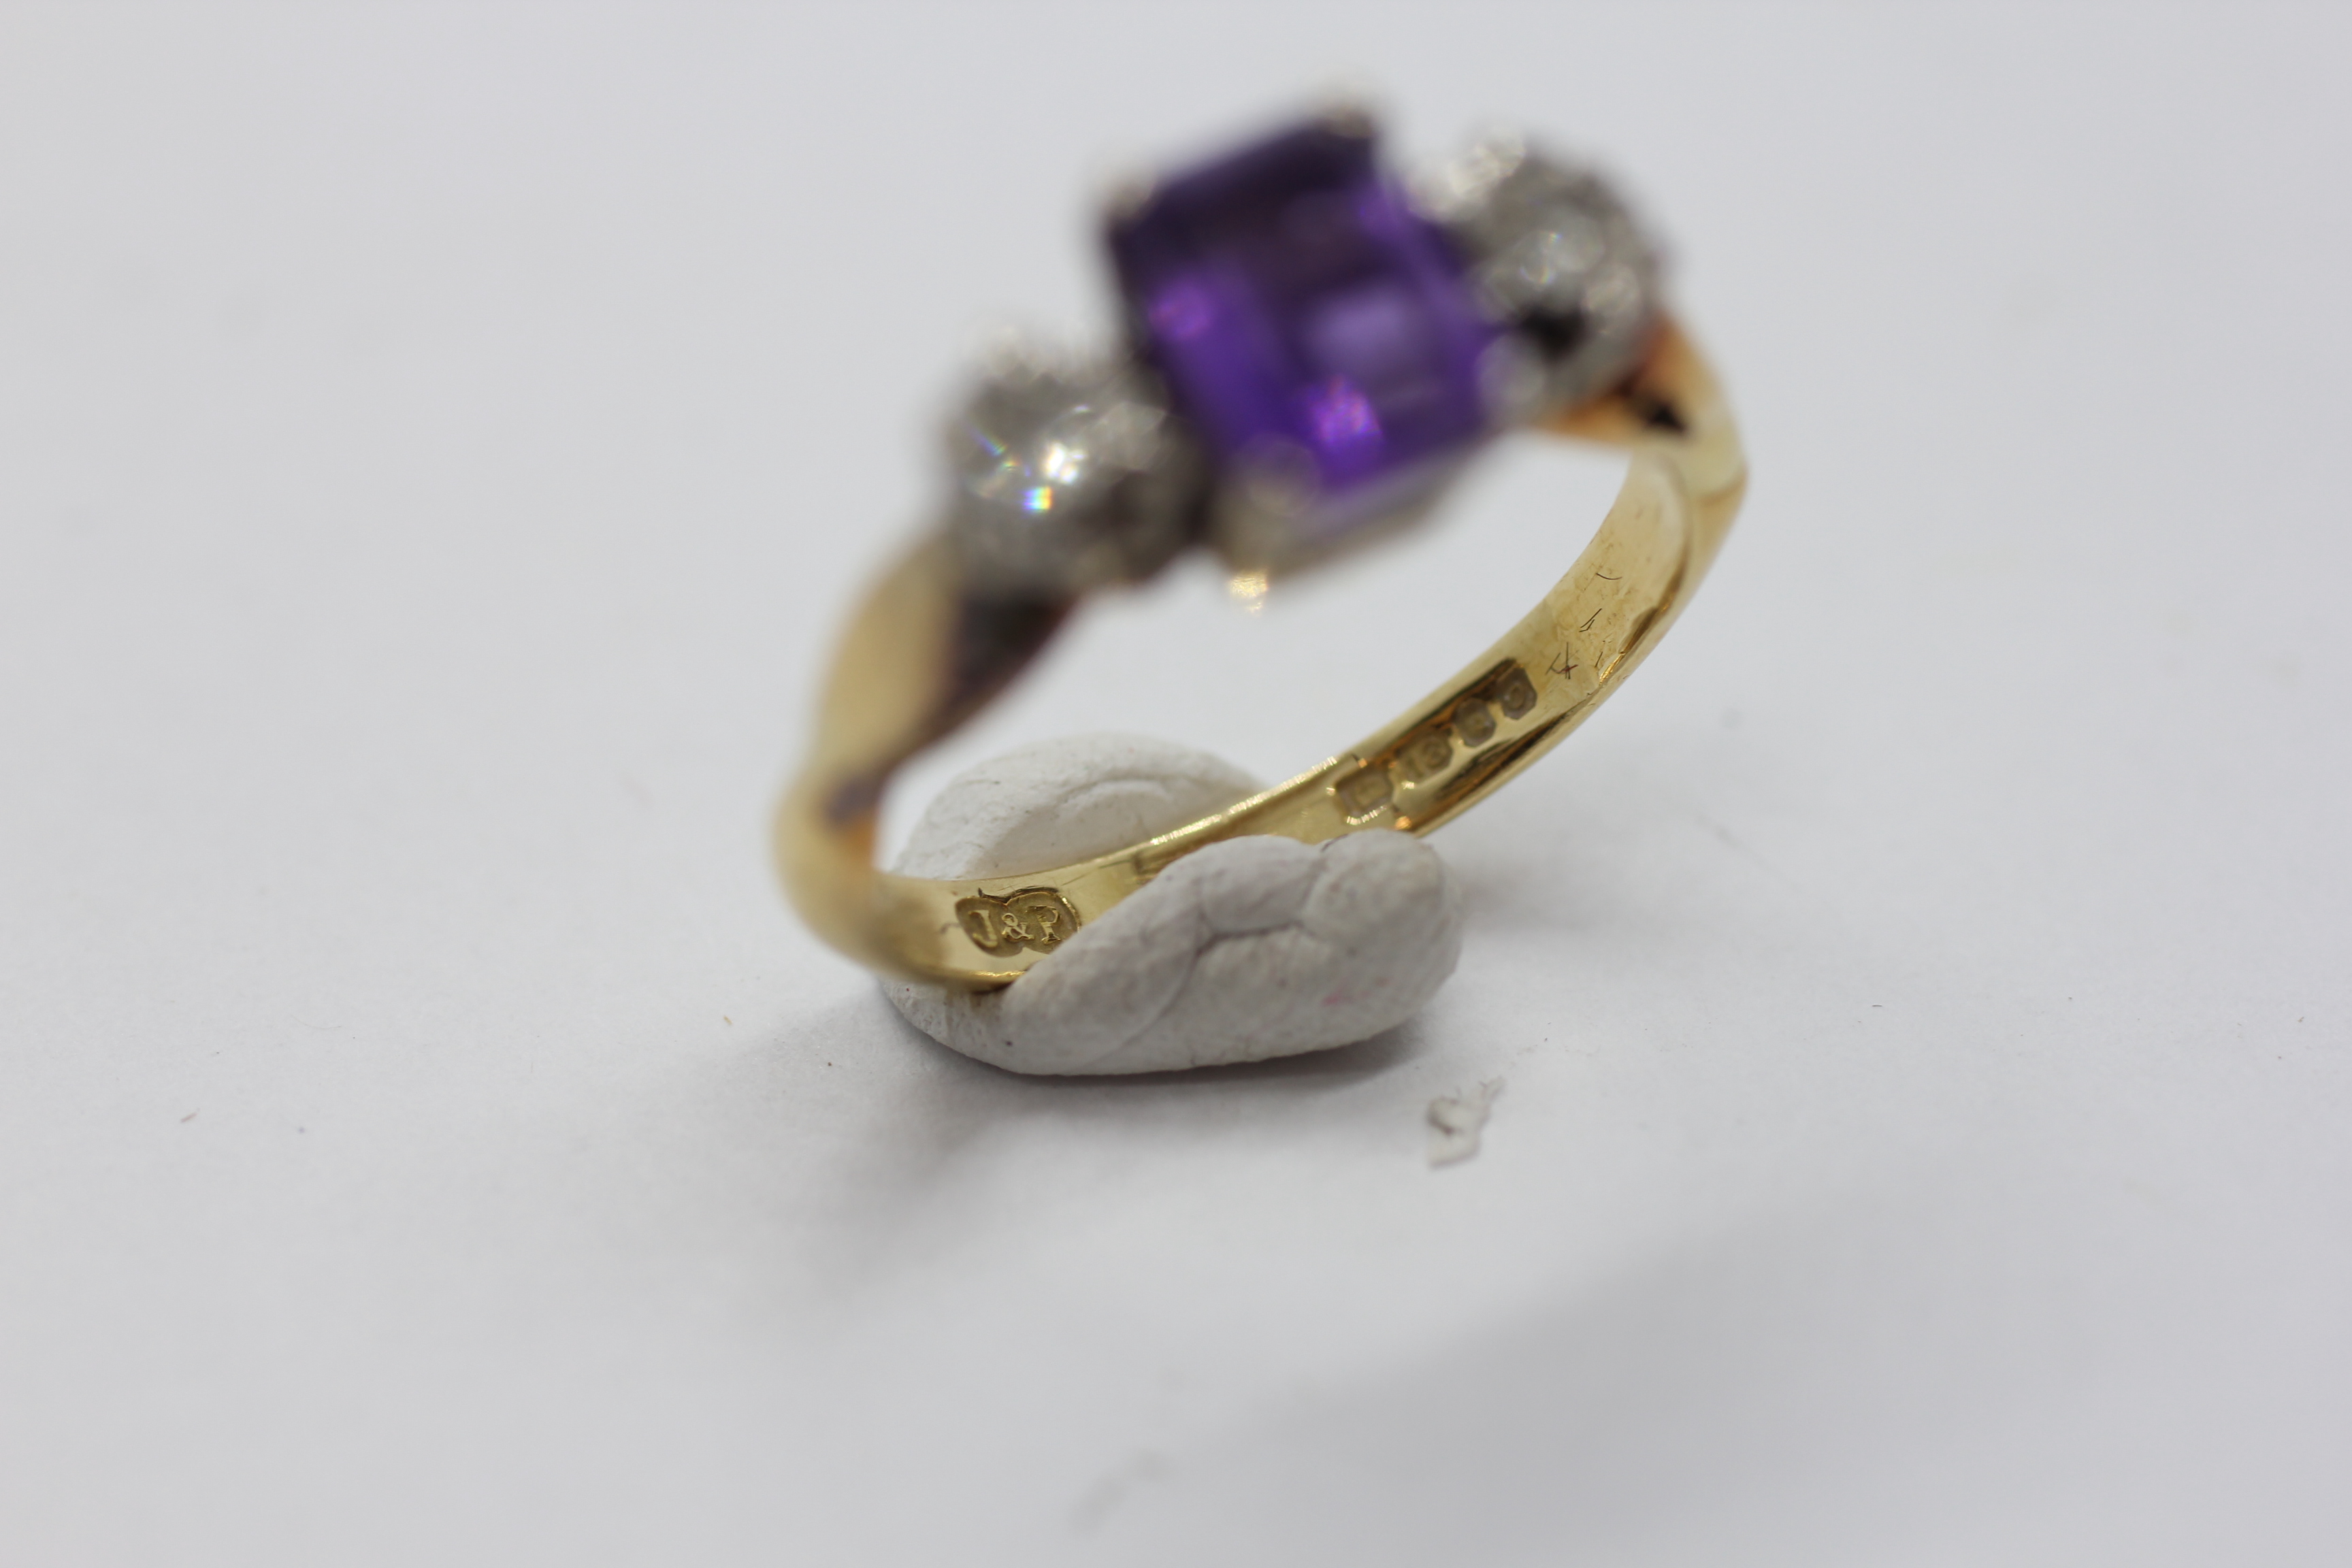 AN 18CT GOLD RING SET WITH A CENTRAL EMERALD CUT AMETHYST AND A DIAMOND EITHER SIDE. - Image 4 of 7